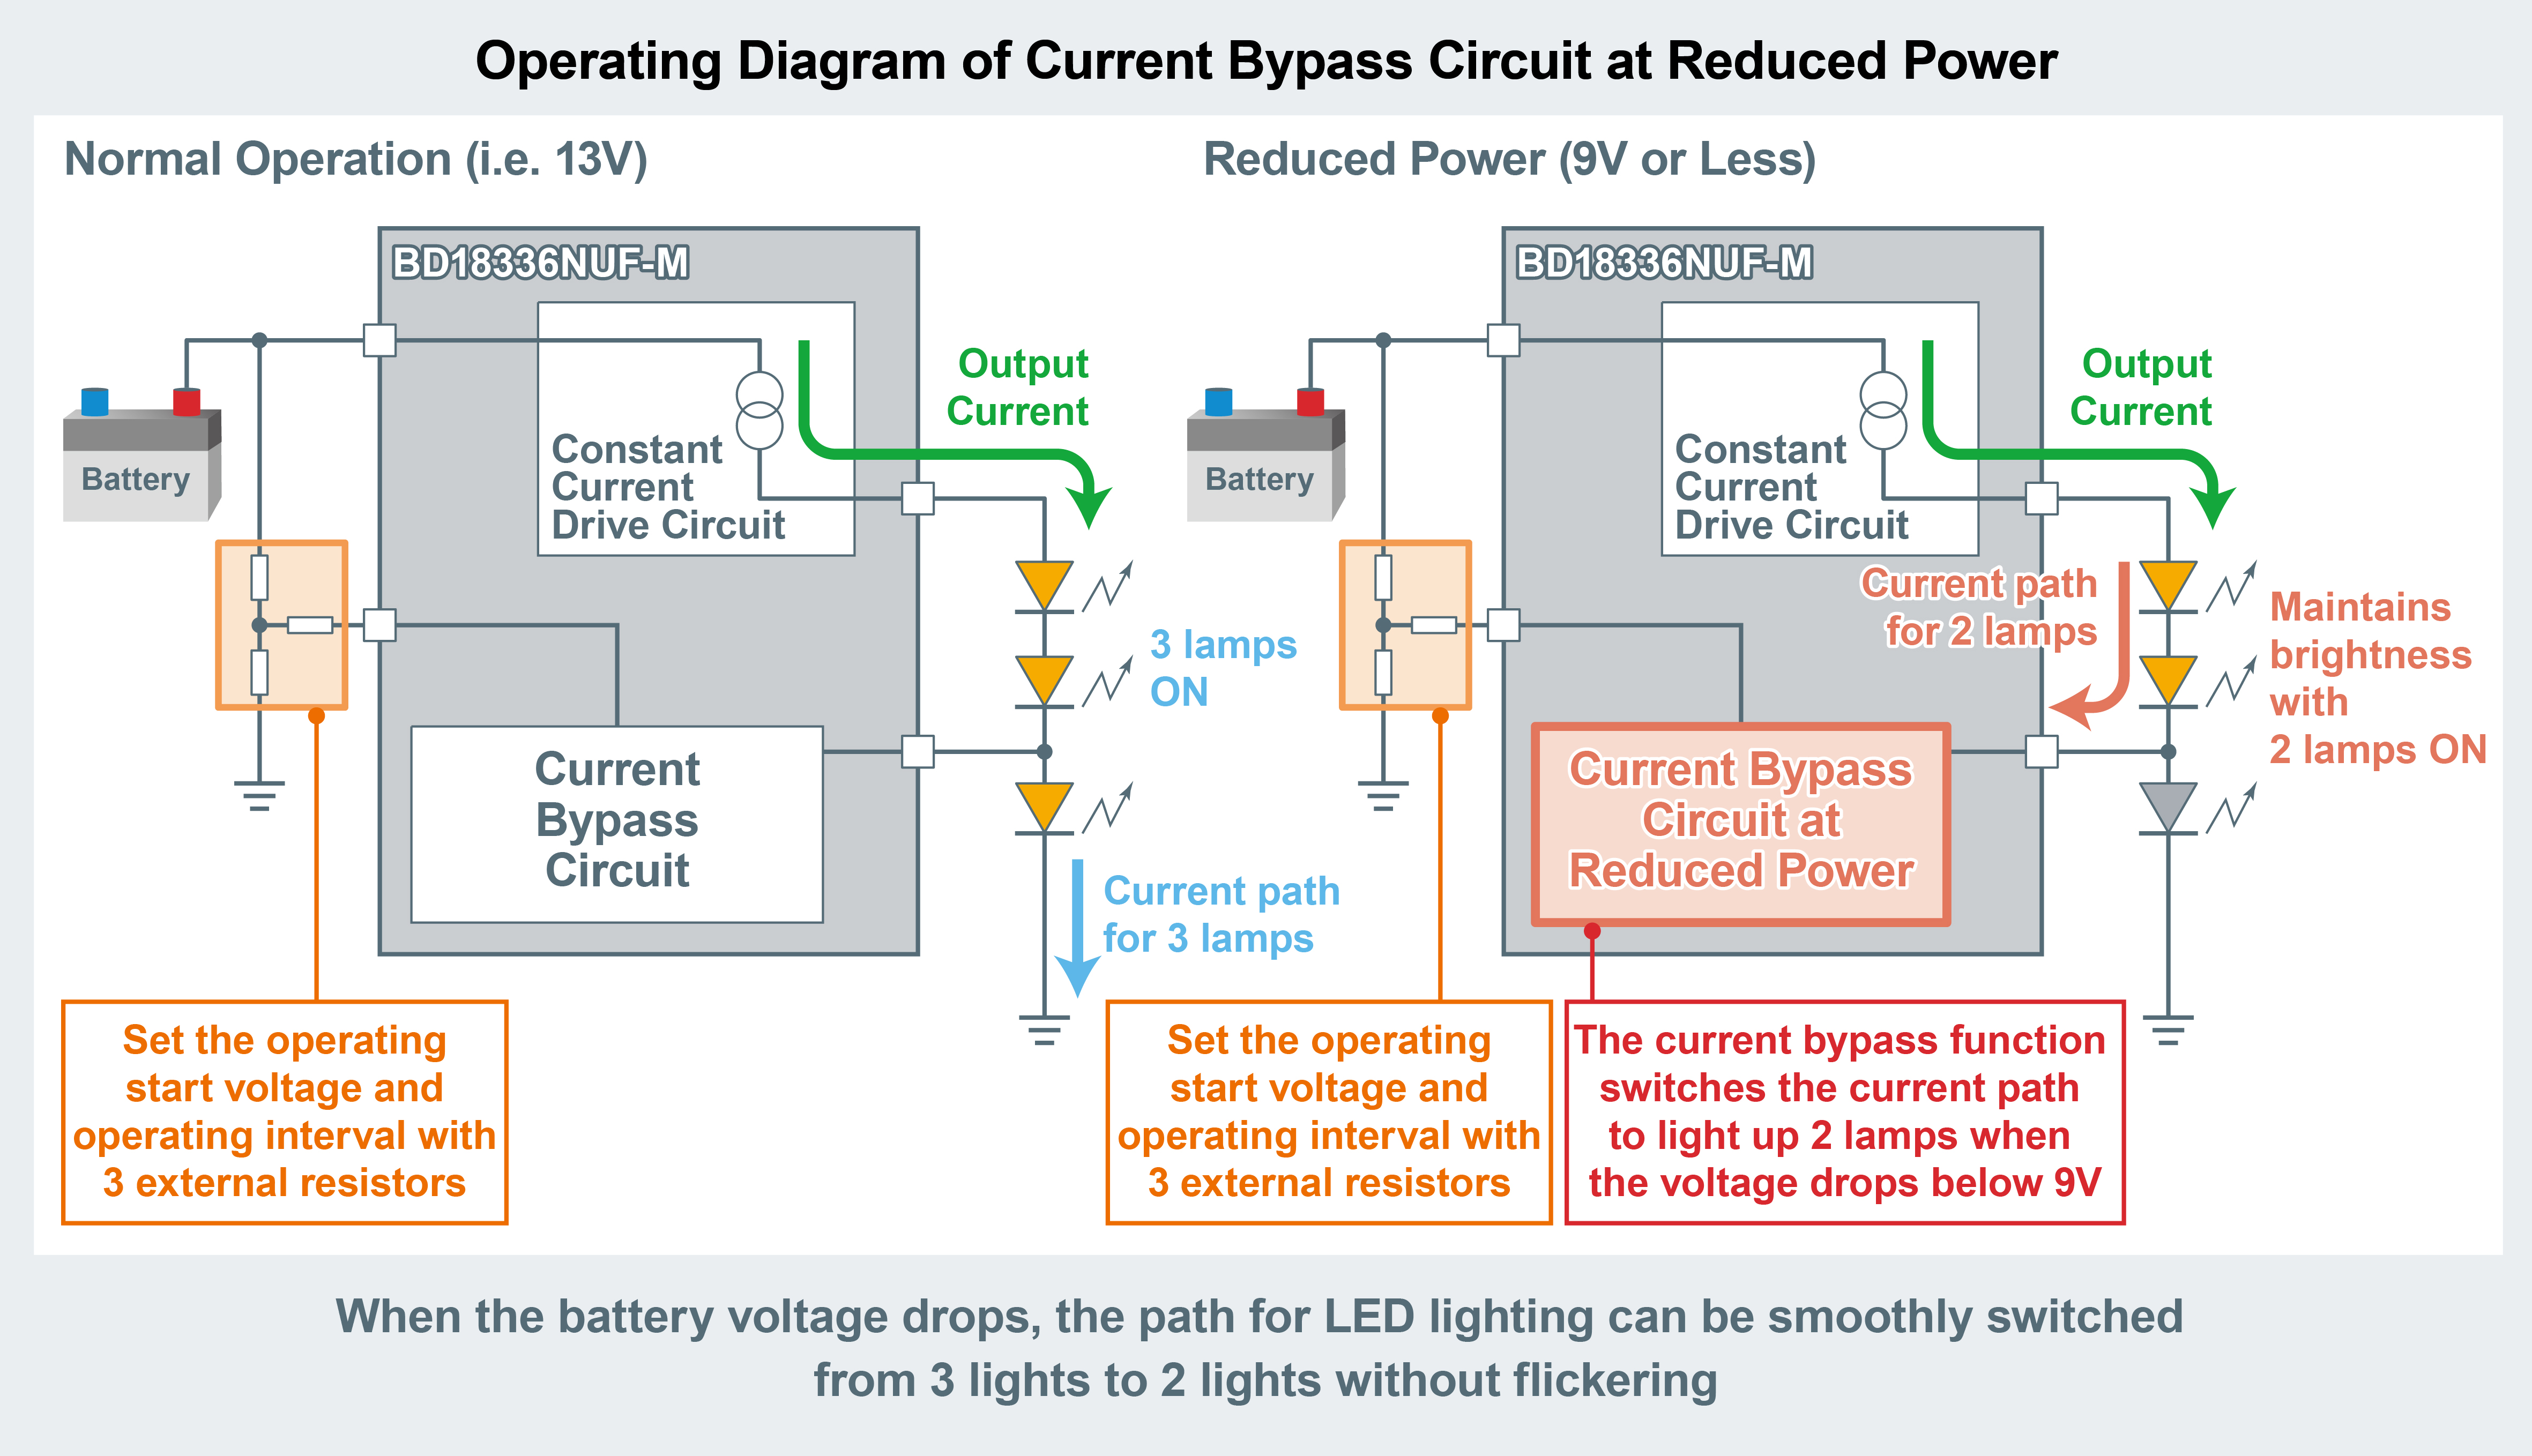 Operating Diagram of Current Bypass Circuit at Reduced Power